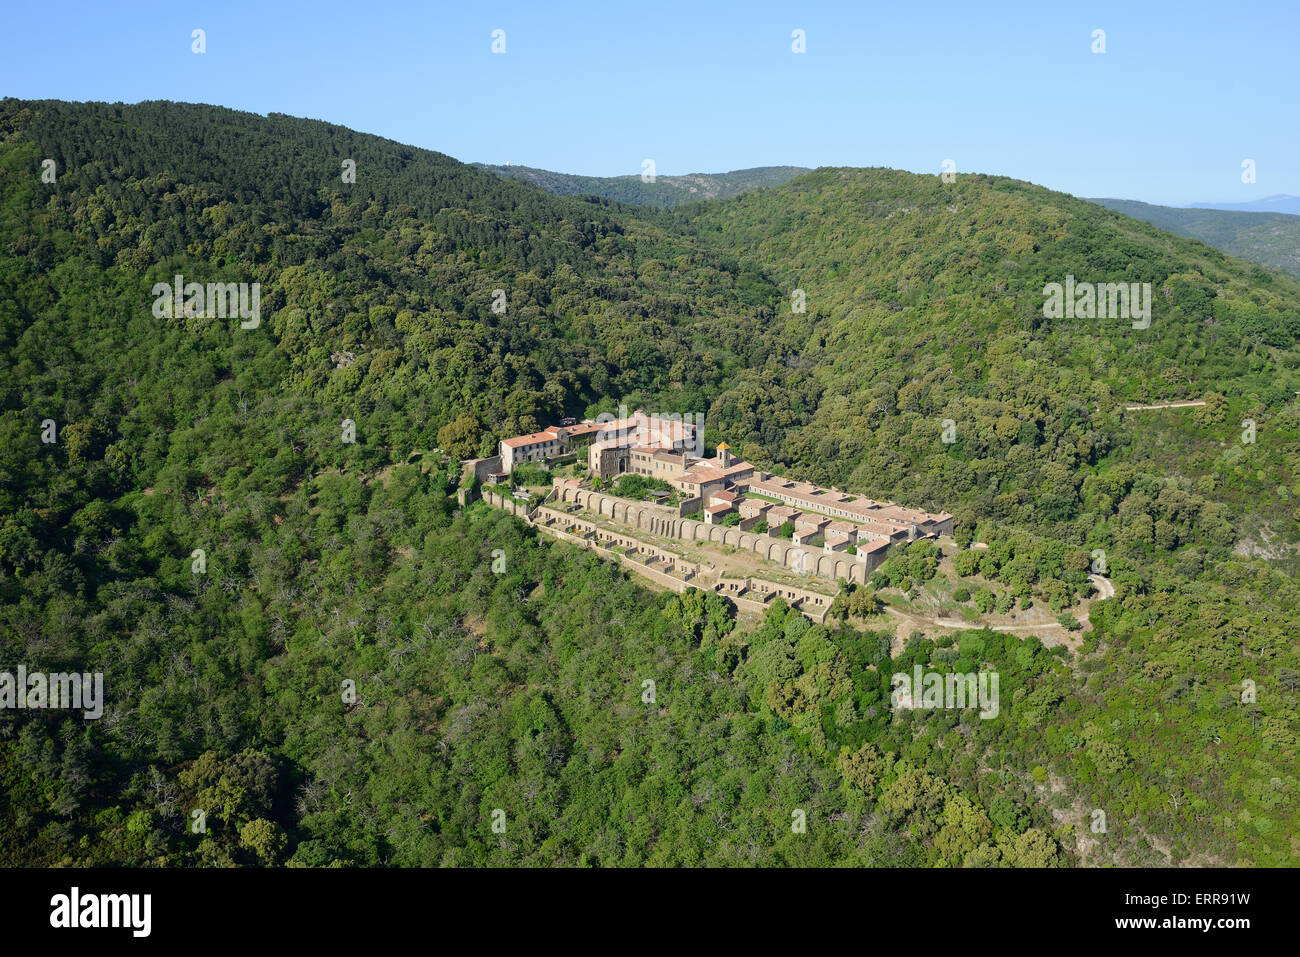 AERIAL VIEW. Monastery isolated in a mountainous area. La Verne Charterhouse, Collobrières, Var, French Riviera's backcountry, France. Stock Photo